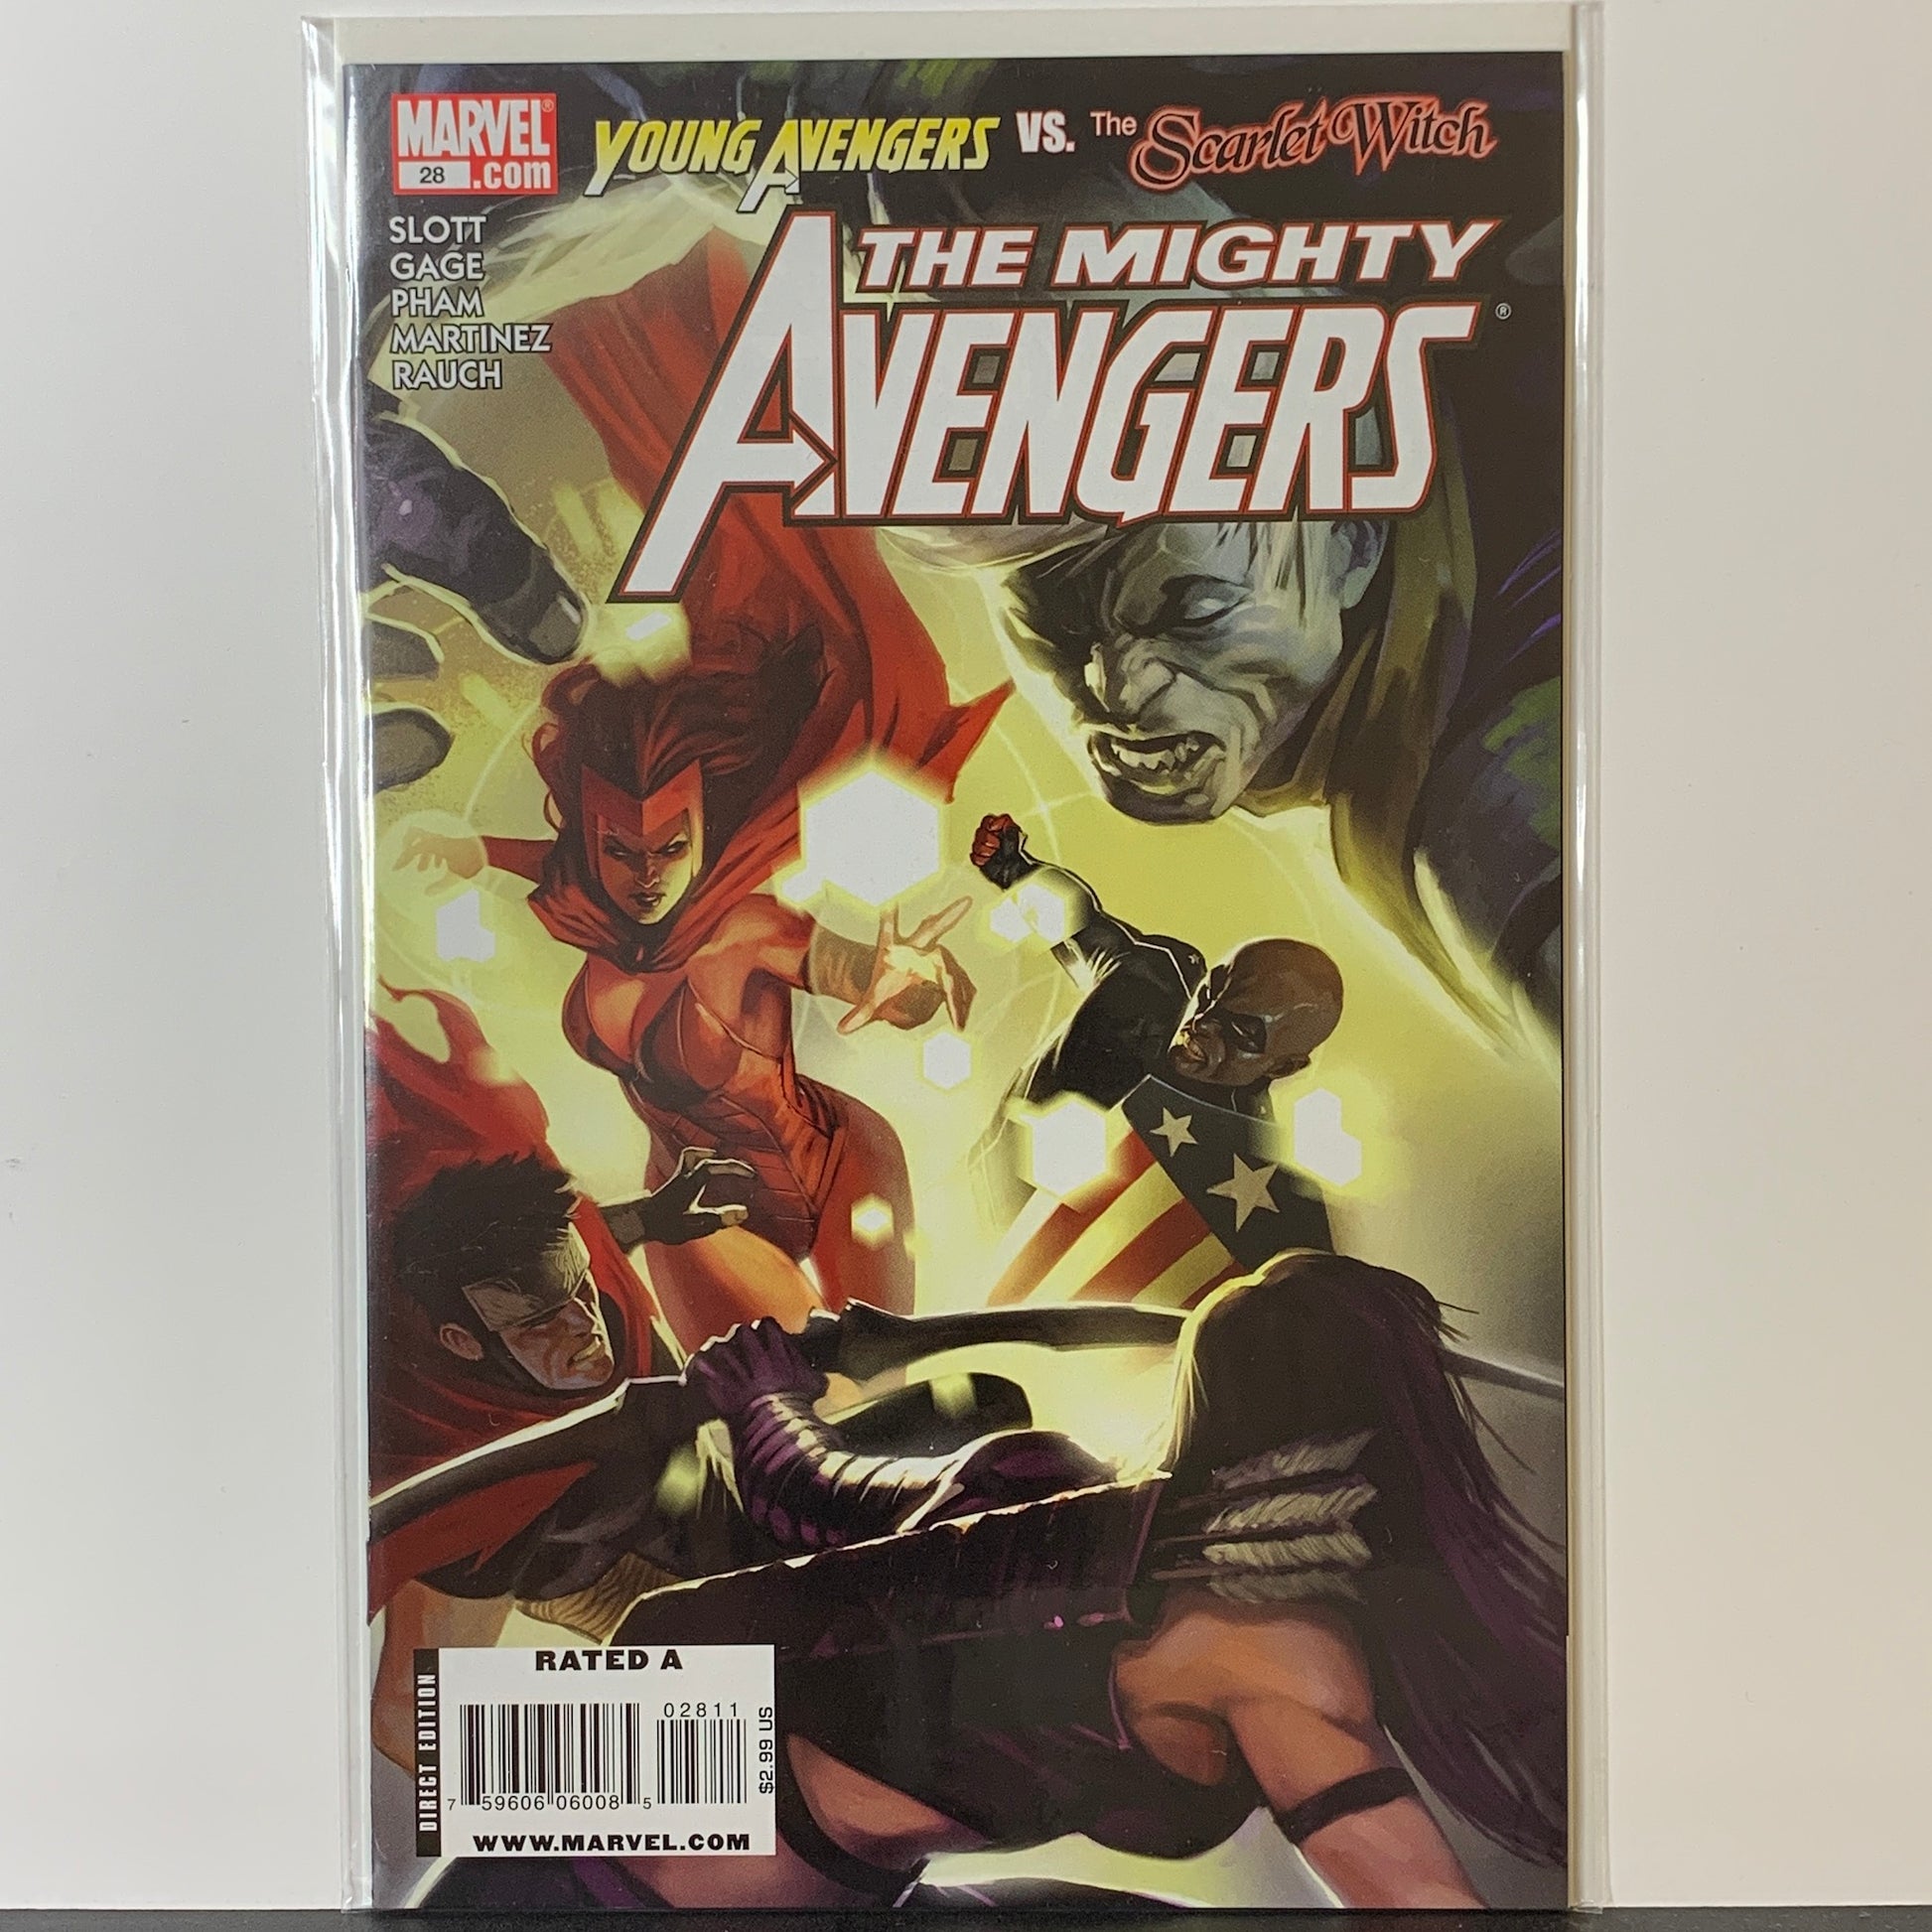 The Mighty Avengers (2007) #28A (VF)